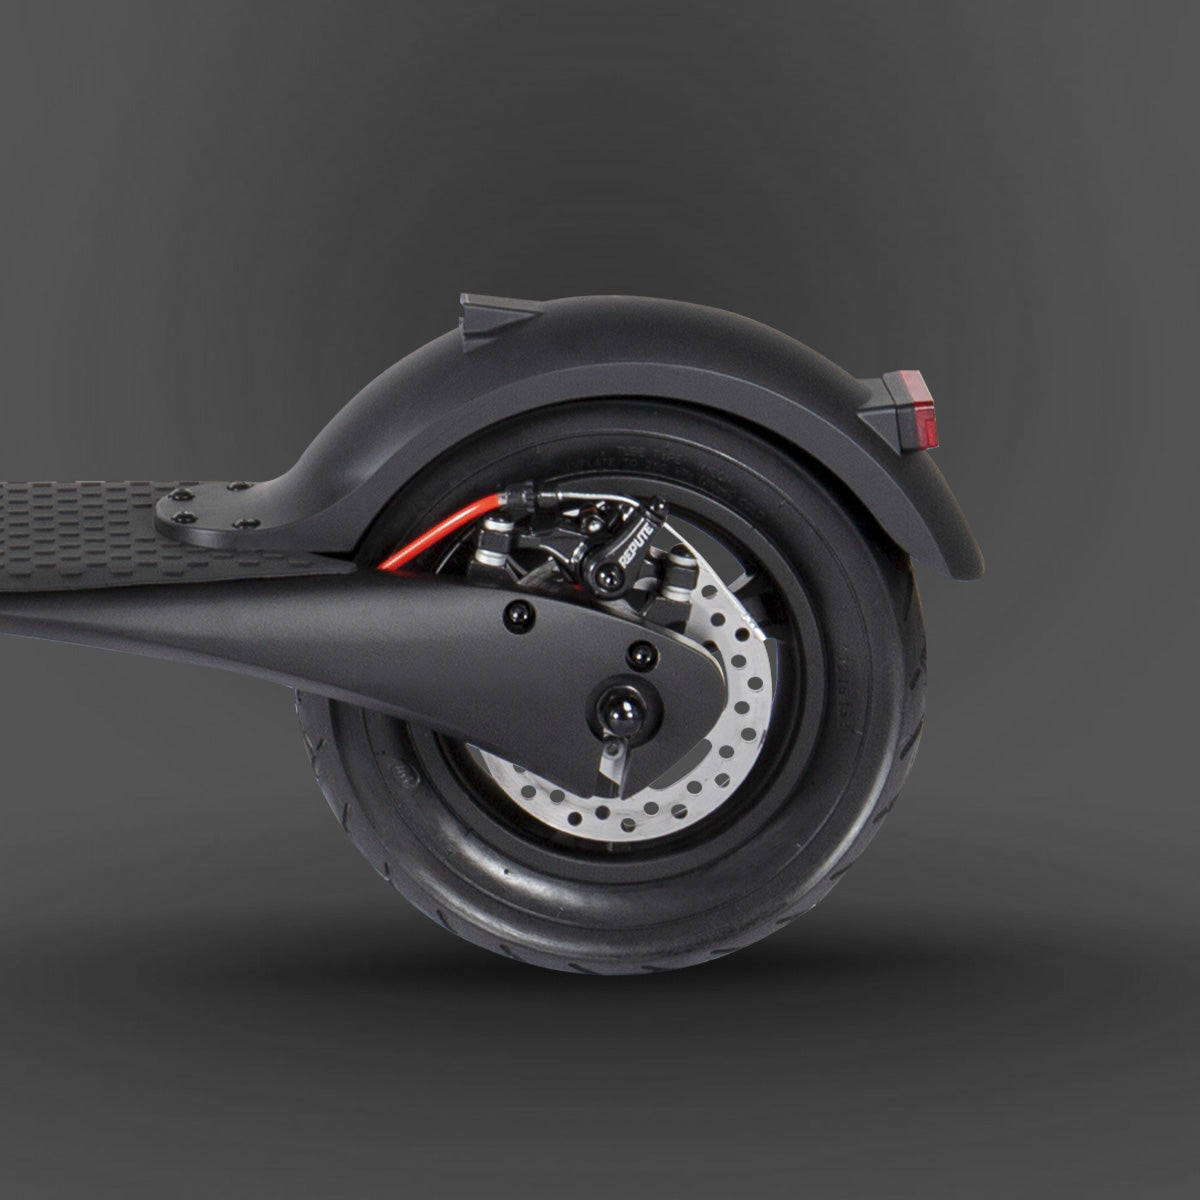 X7 Max Folding Electric Scooter Bundle